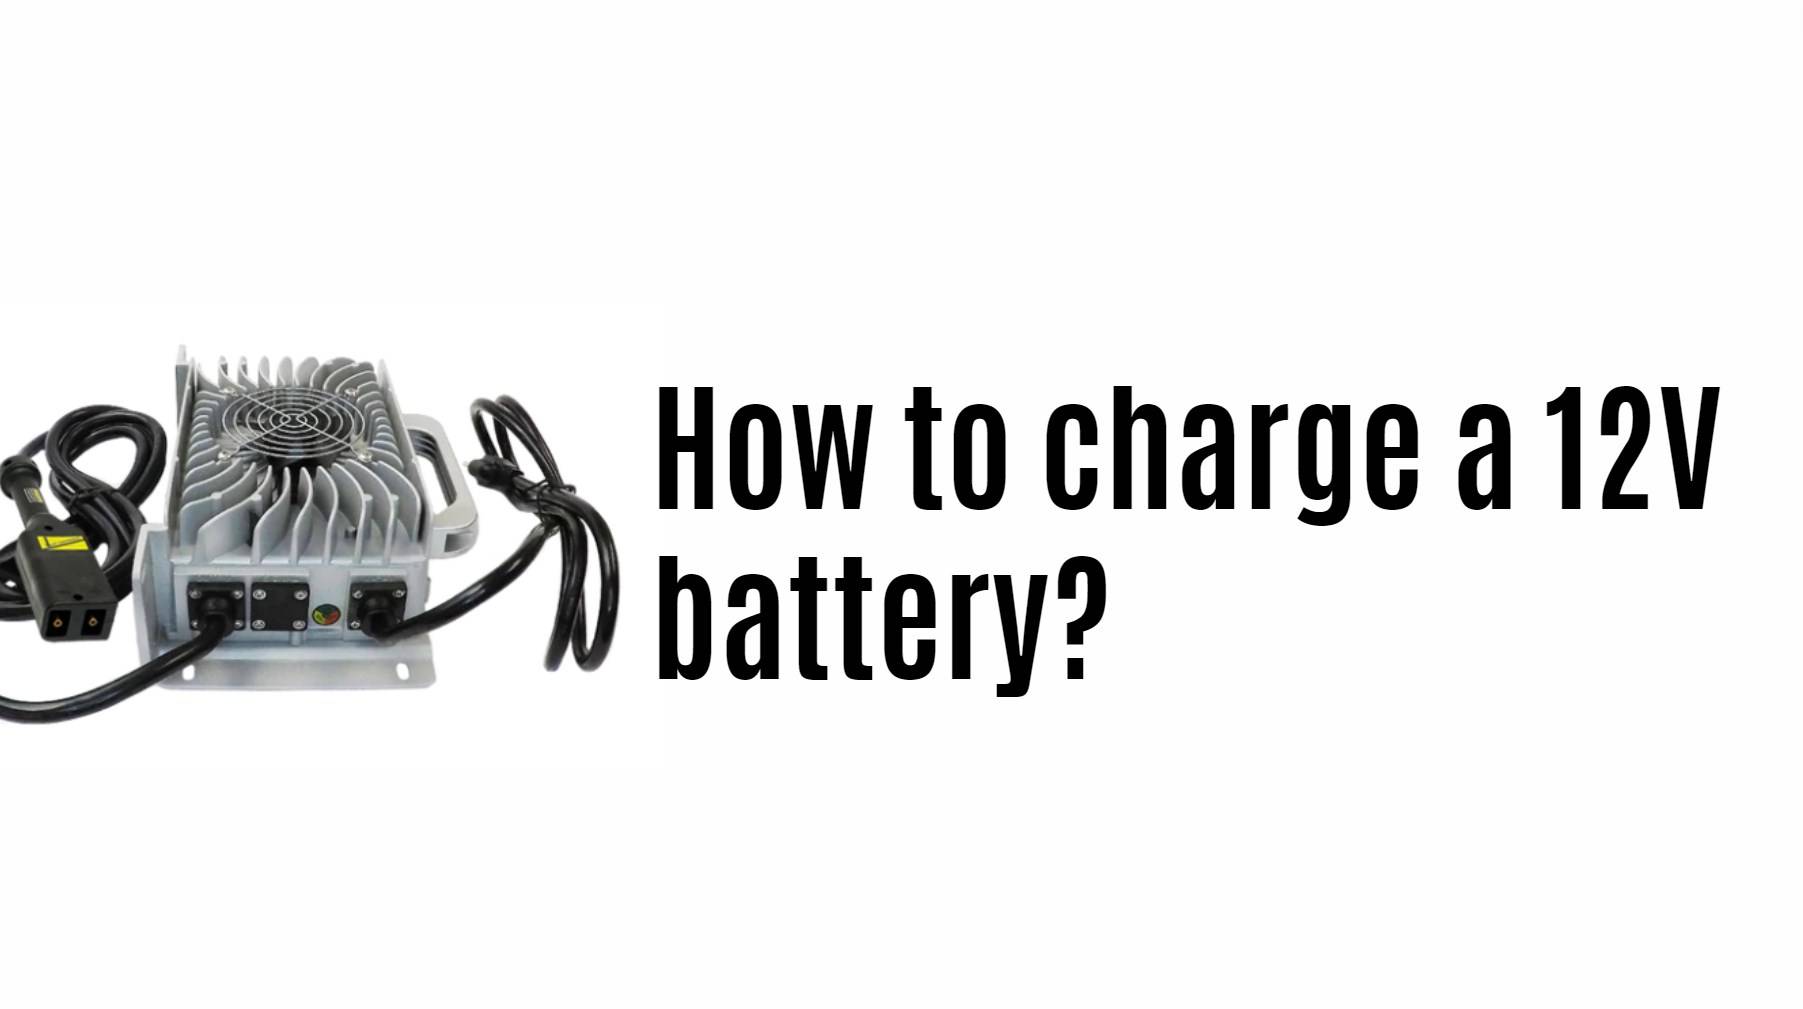 How to charge a 12 volt battery?